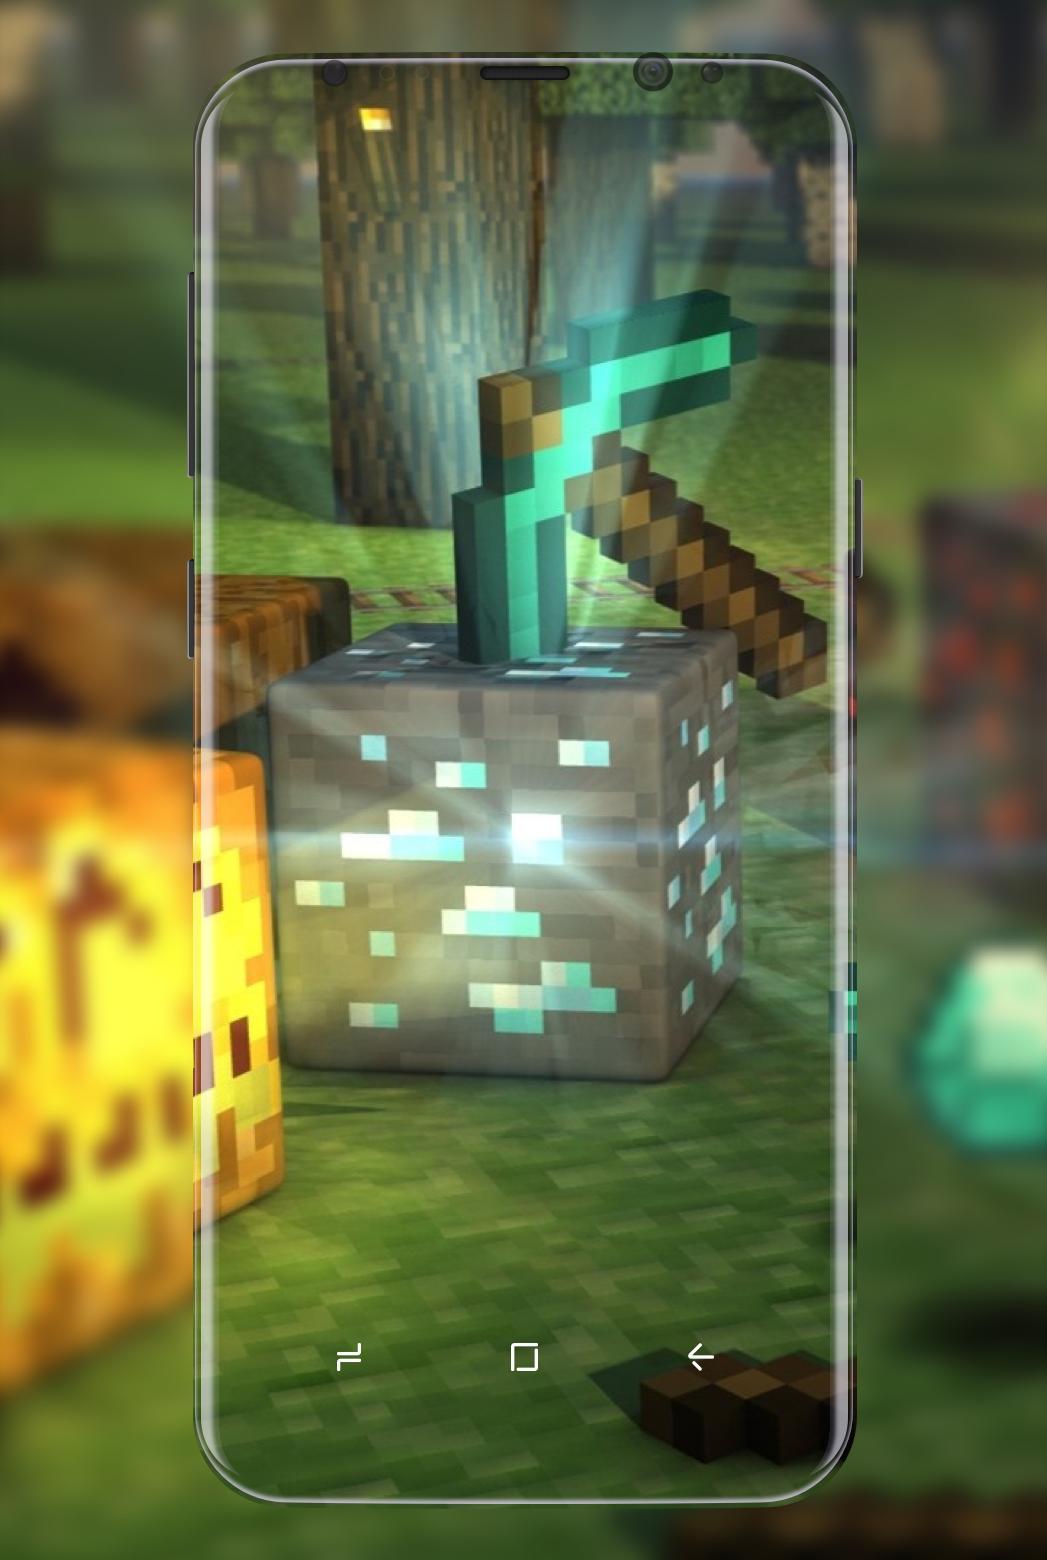 Minecraft Wallpaper Hd Wallpaper For Android Apk Download